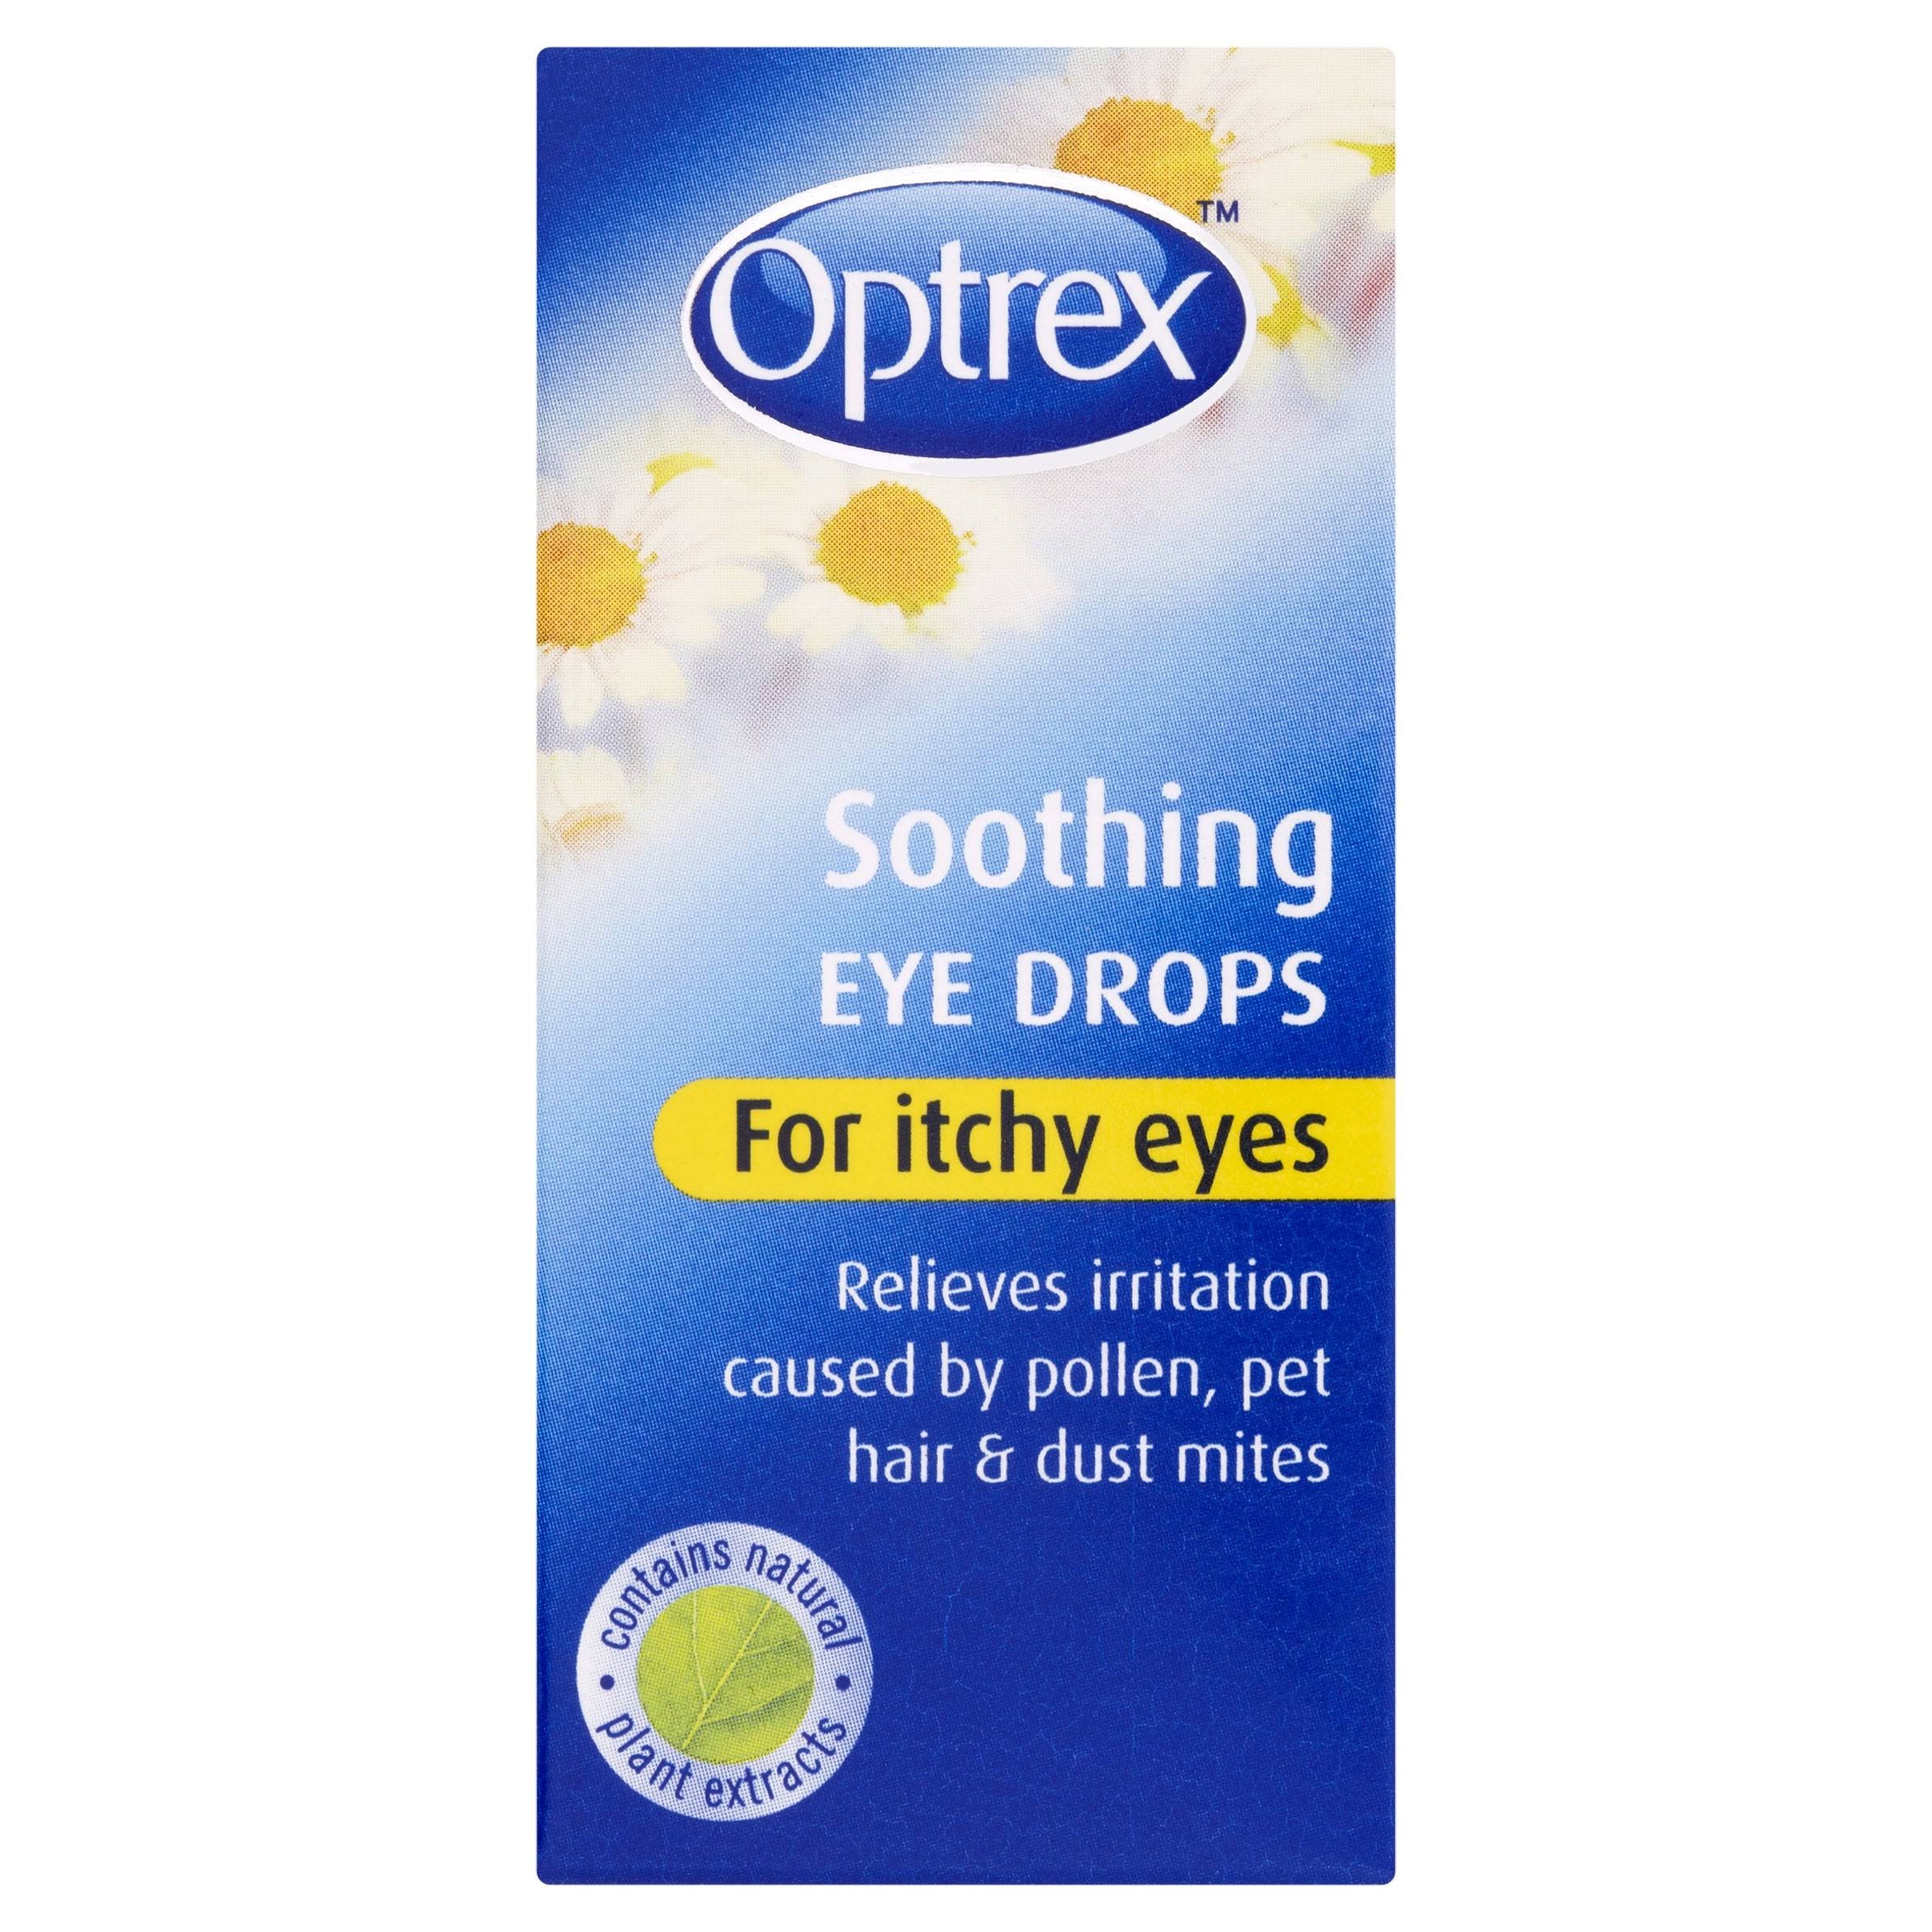 Optrex Soothing Eye Drops - Itchy Eyes, 10ml